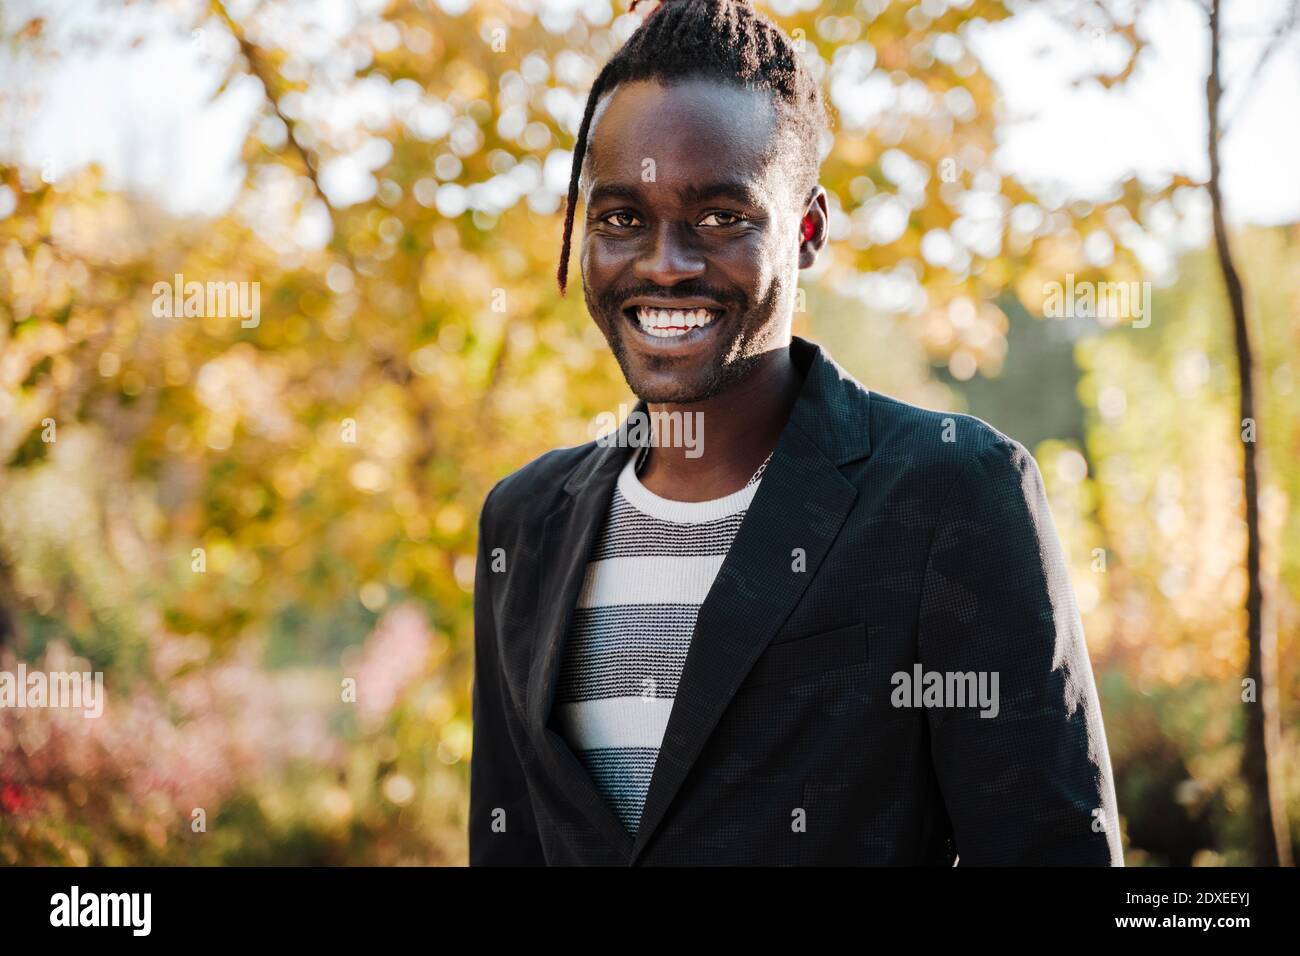 Smiling young African man in park Stock Photo